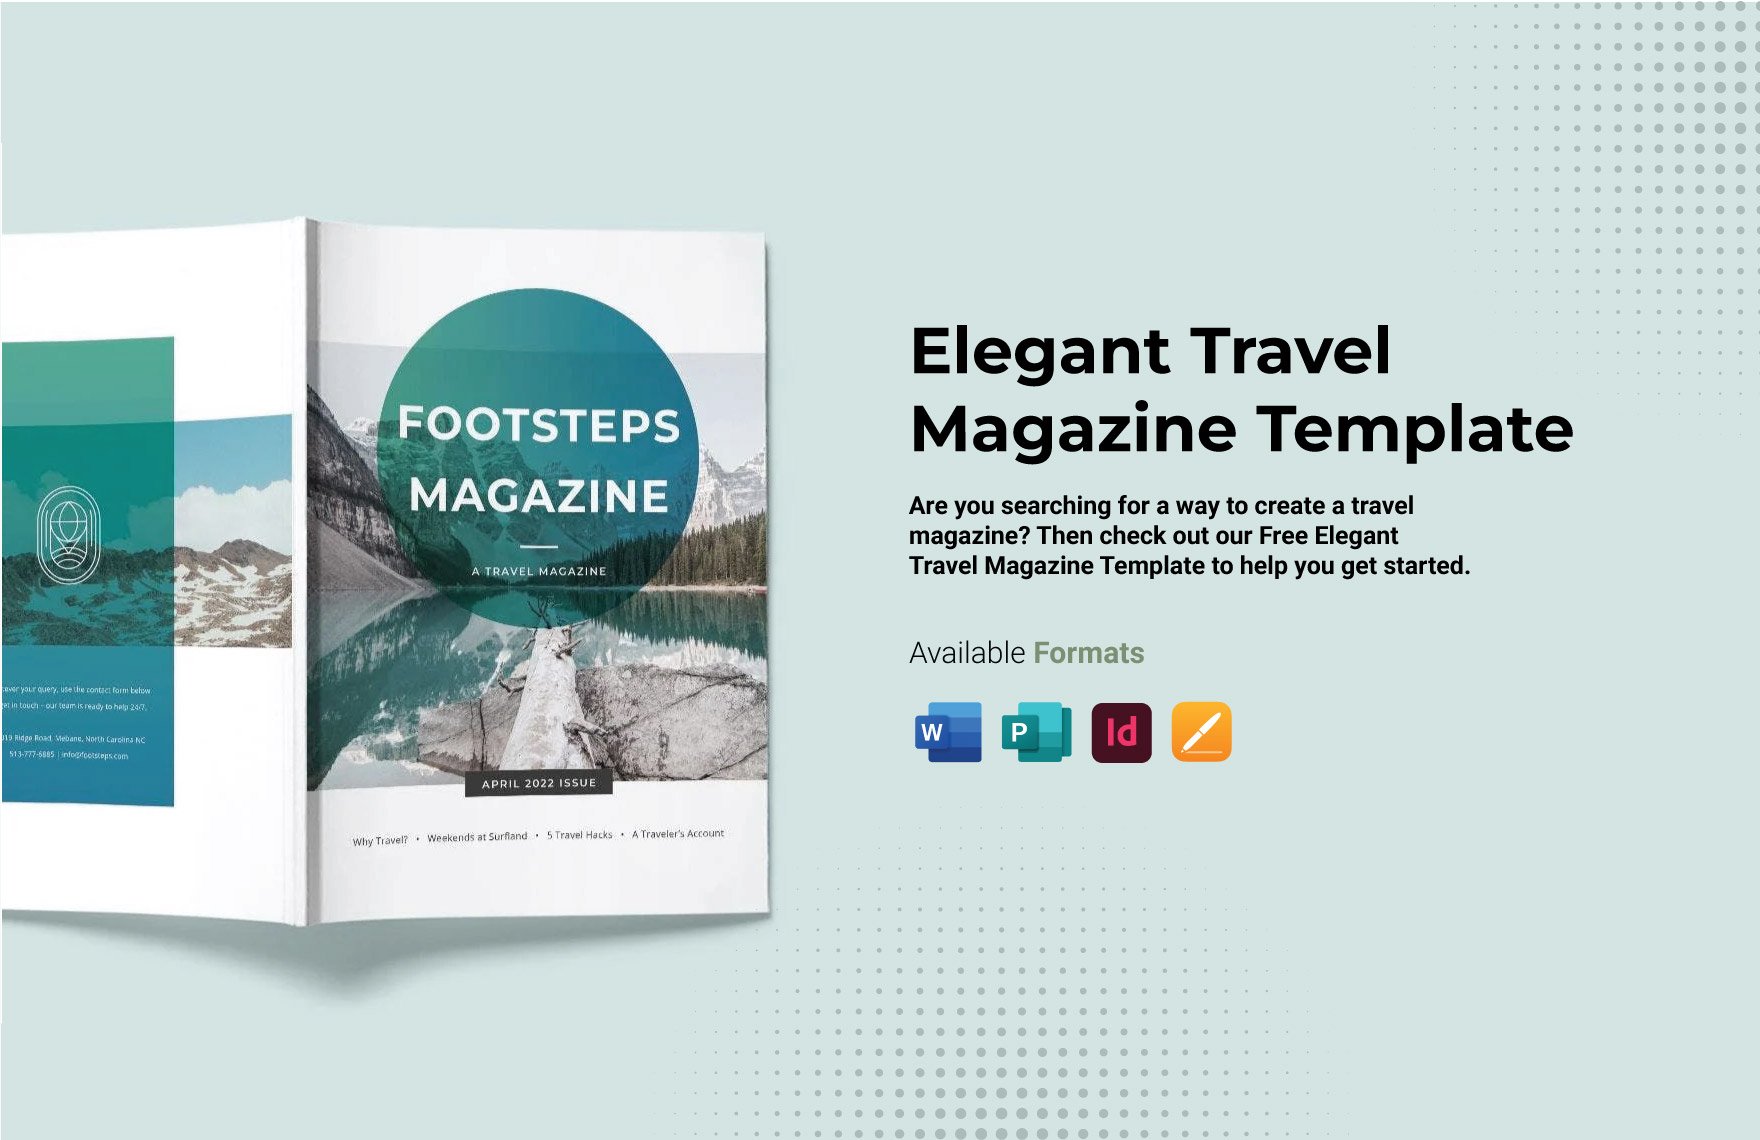 Elegant Travel Magazine Template in Word, Apple Pages, Publisher, InDesign